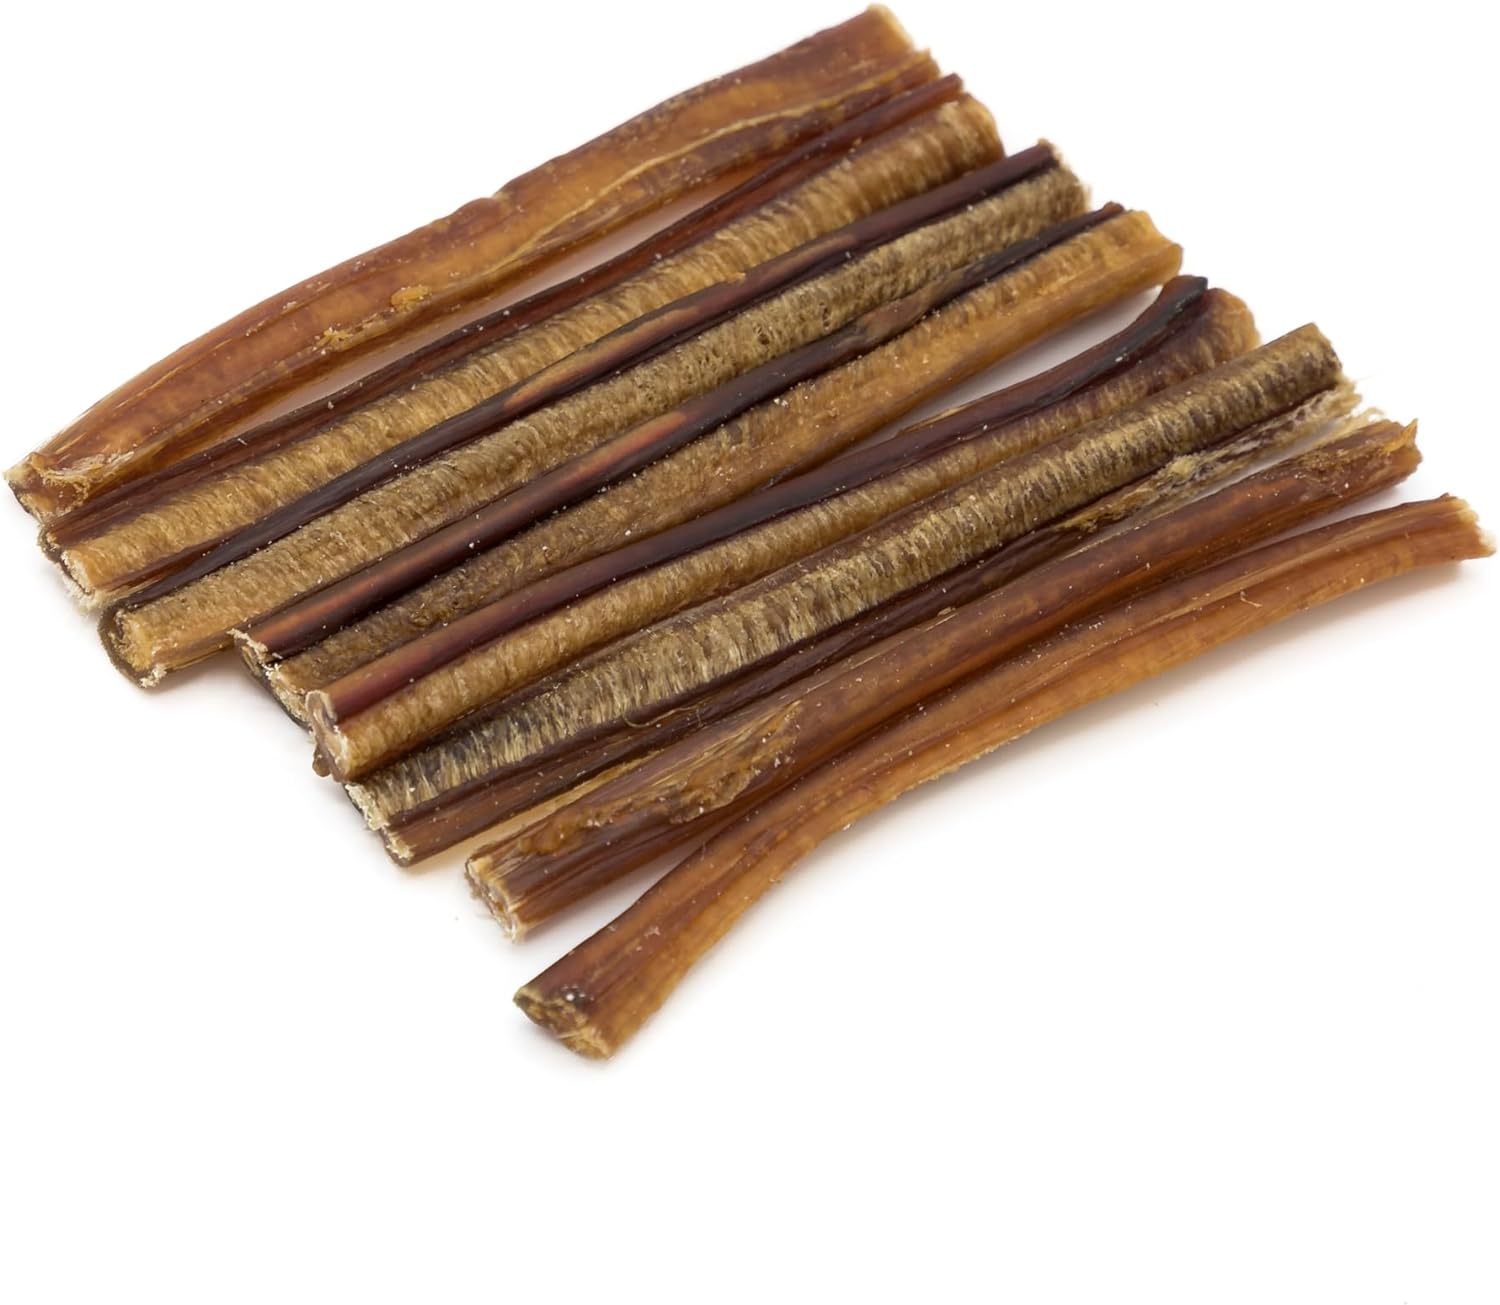 Best Bully Sticks 6 Inch All-Natural Bully Sticks for Dogs - 6” Fully Digestible, 100% Grass-Fed Beef, Grain and Rawhide Free | 8 oz : Pet Supplies